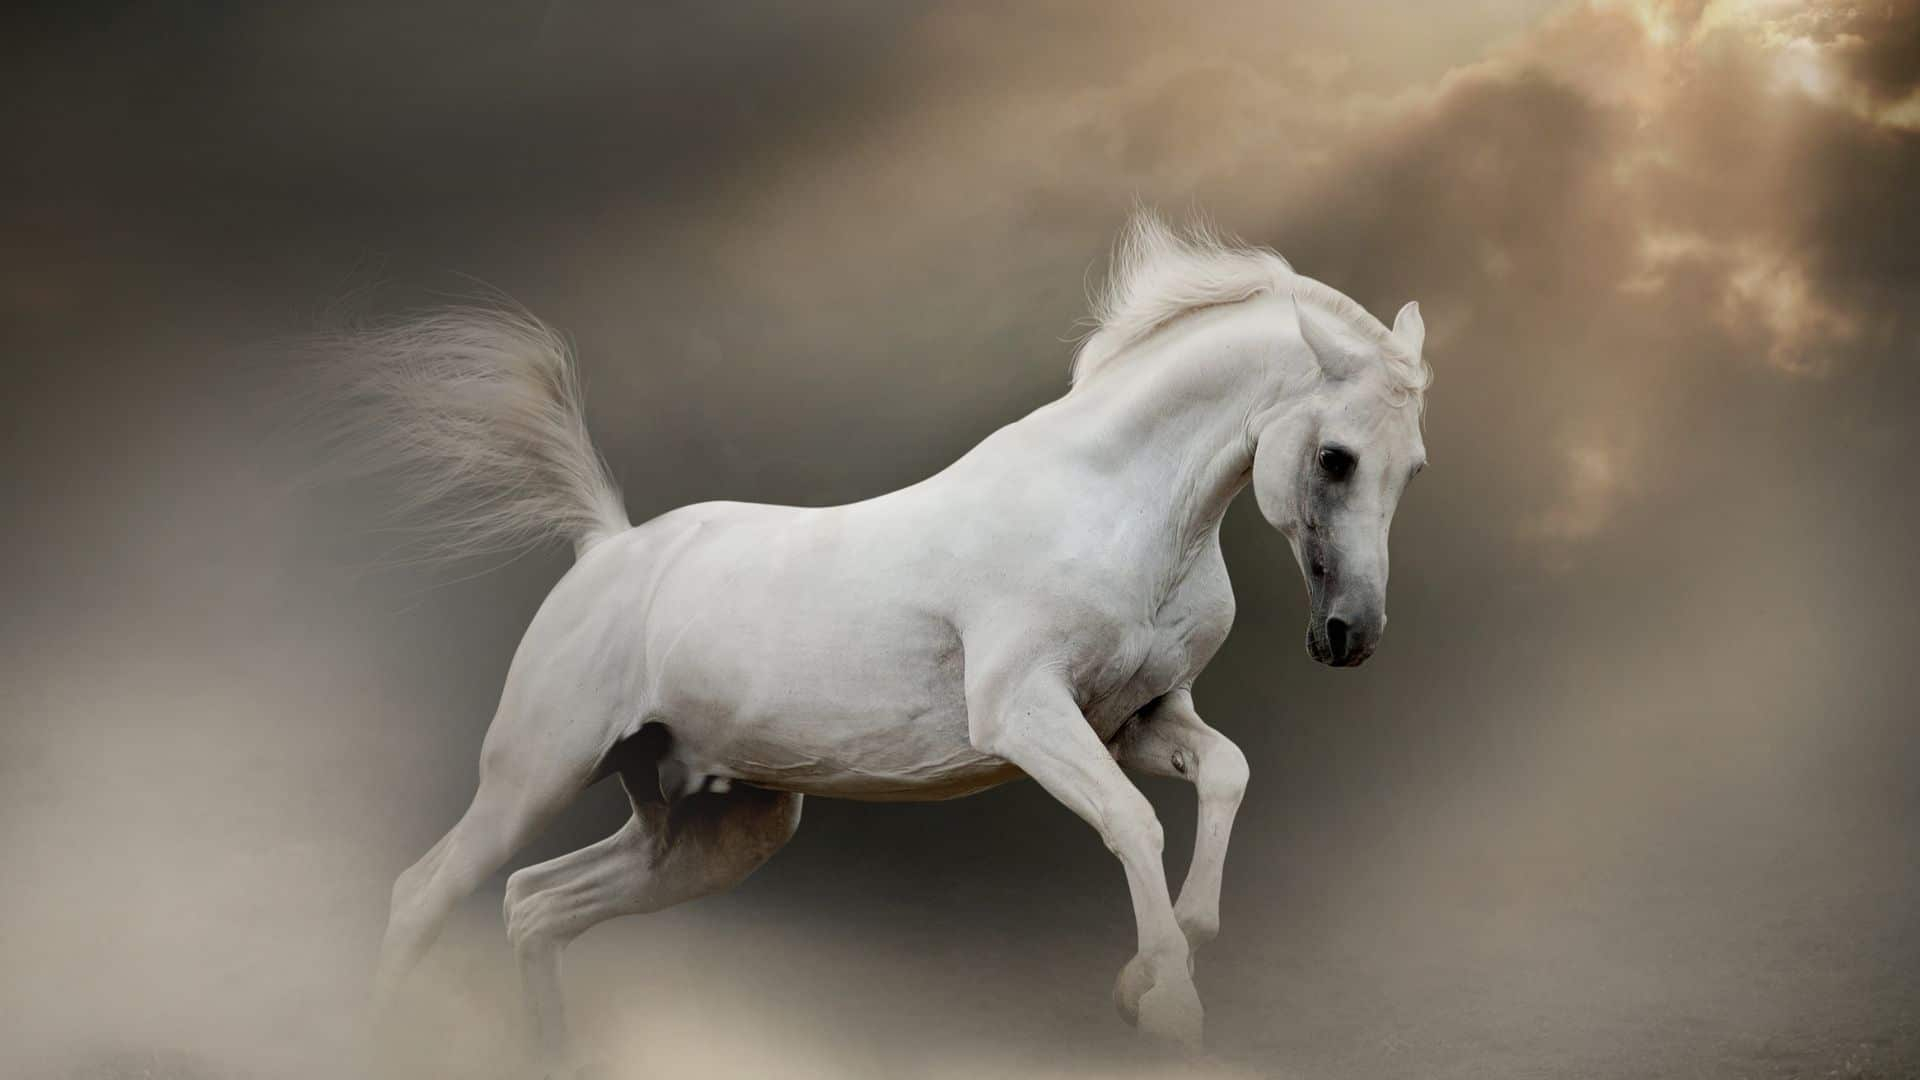 1920x1080 Good Names For White Horses: Mares, Stallions, And Geldings